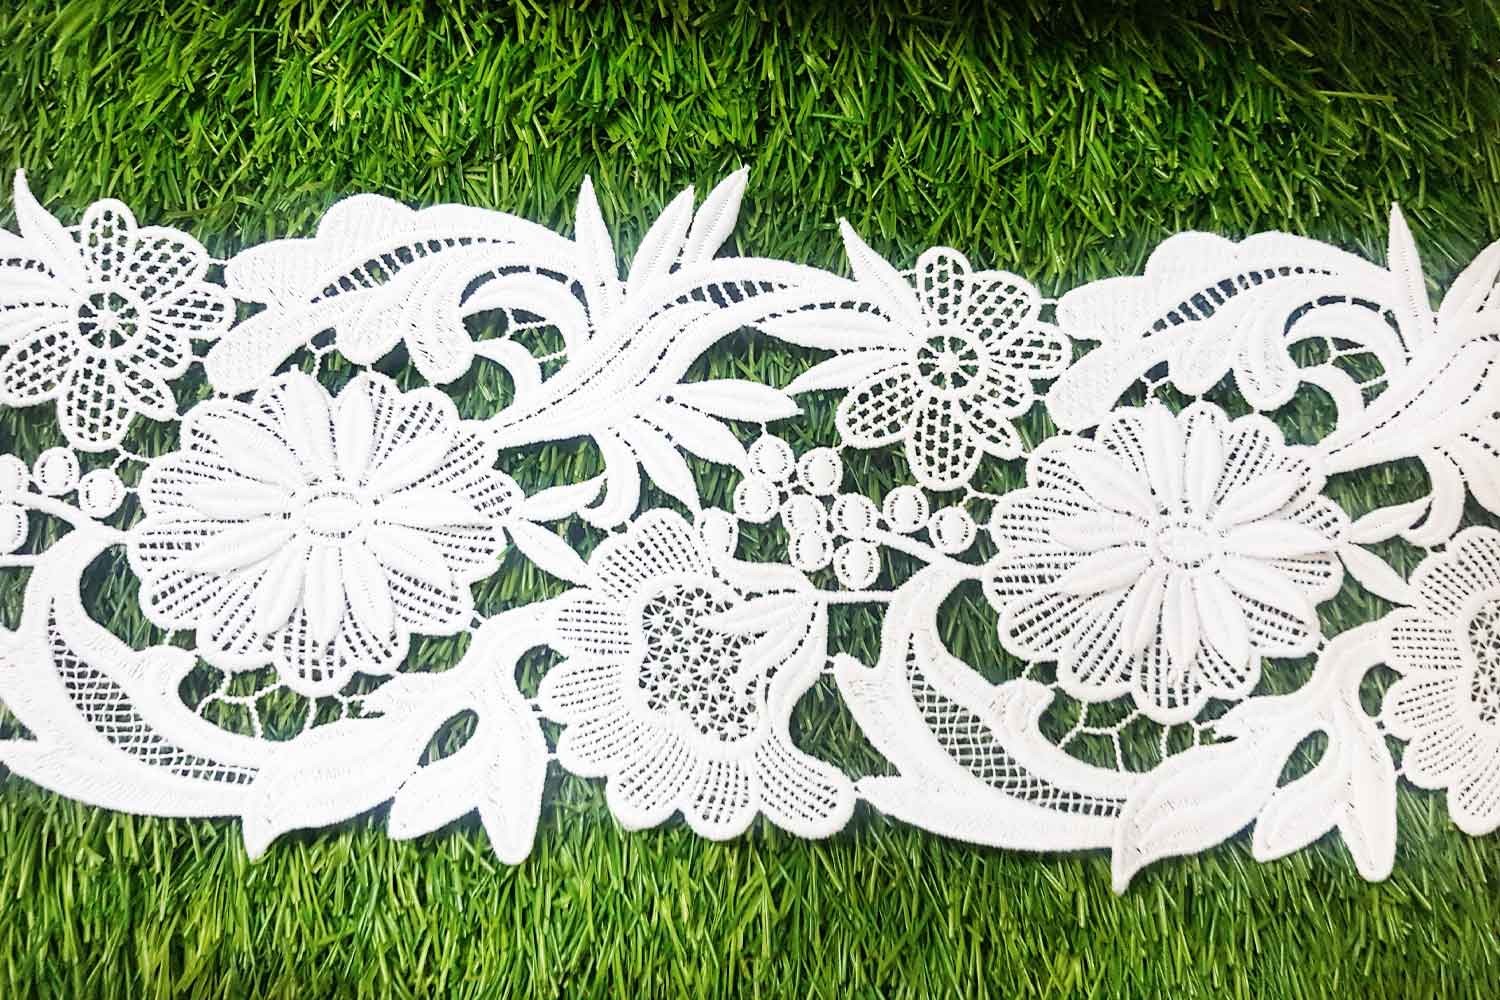 White 20mm GPO Cotton Lace, For Garment